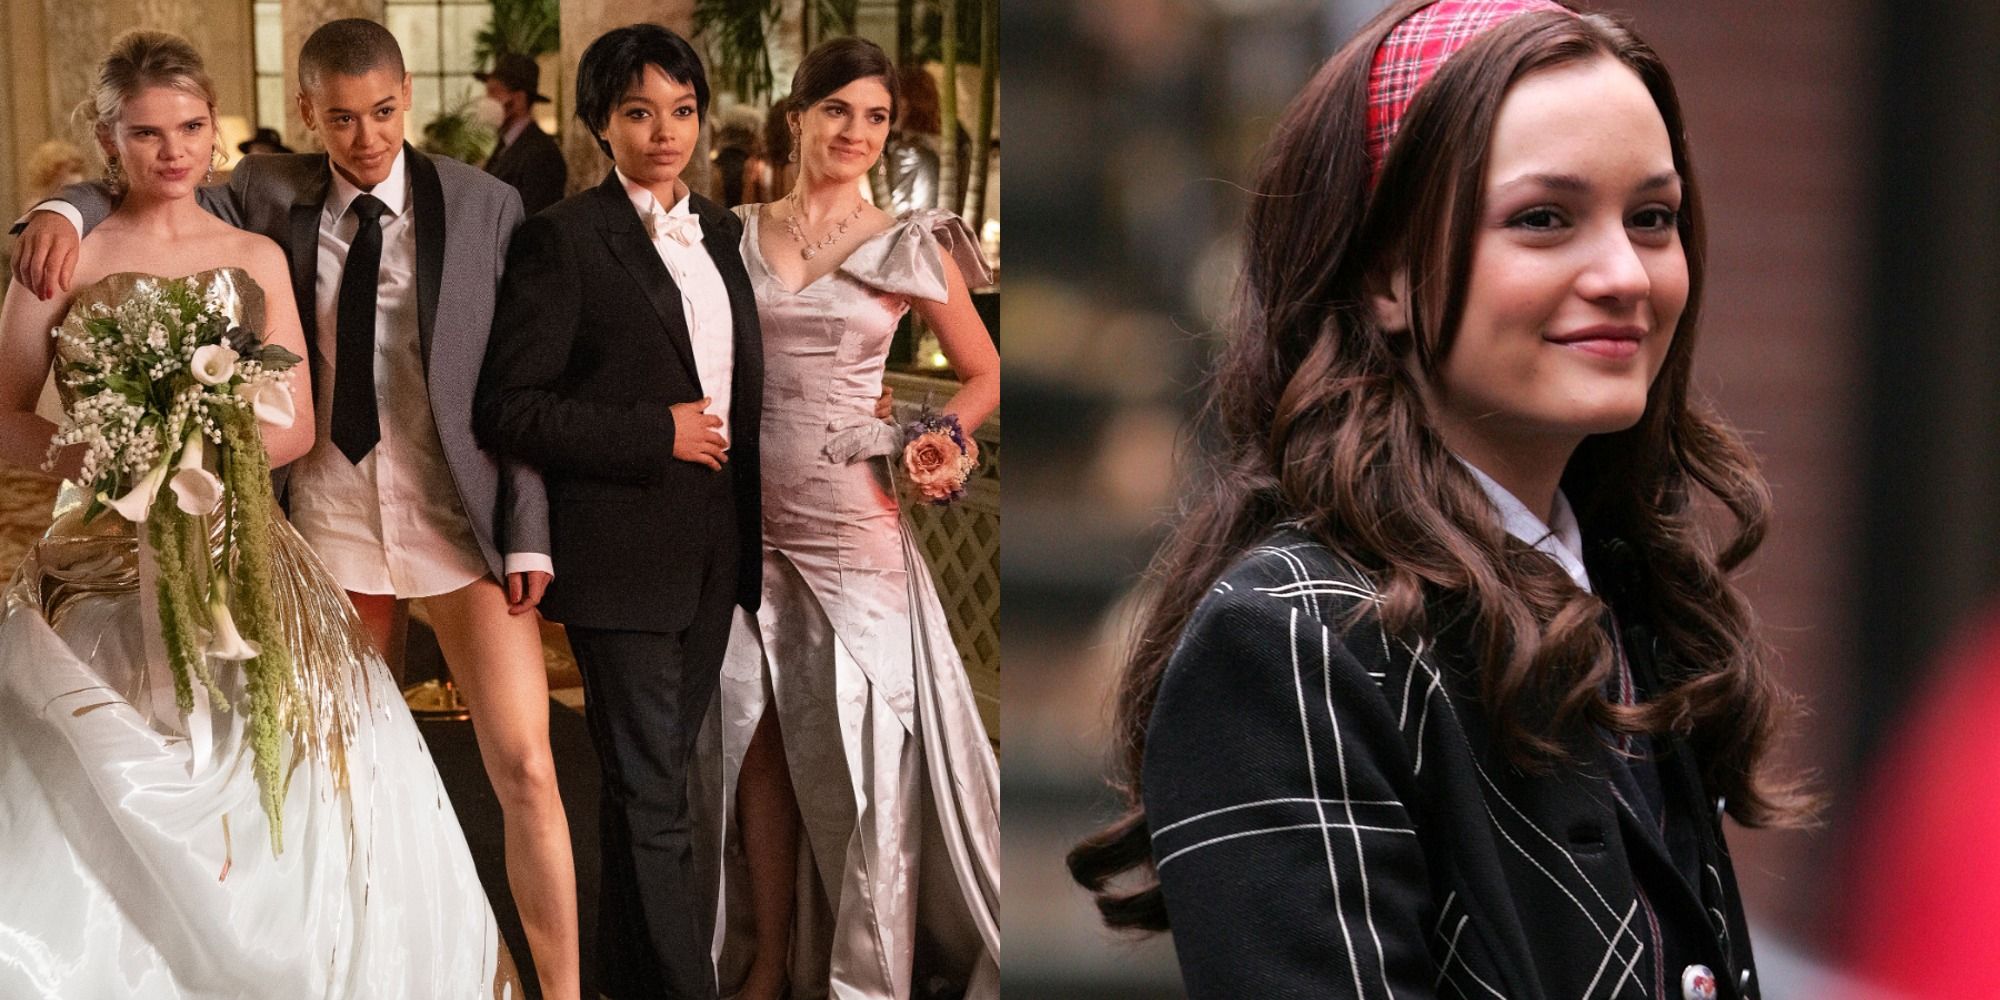 Split image showing the characters of the GG reboot in costume and Blair Waldorf smiling